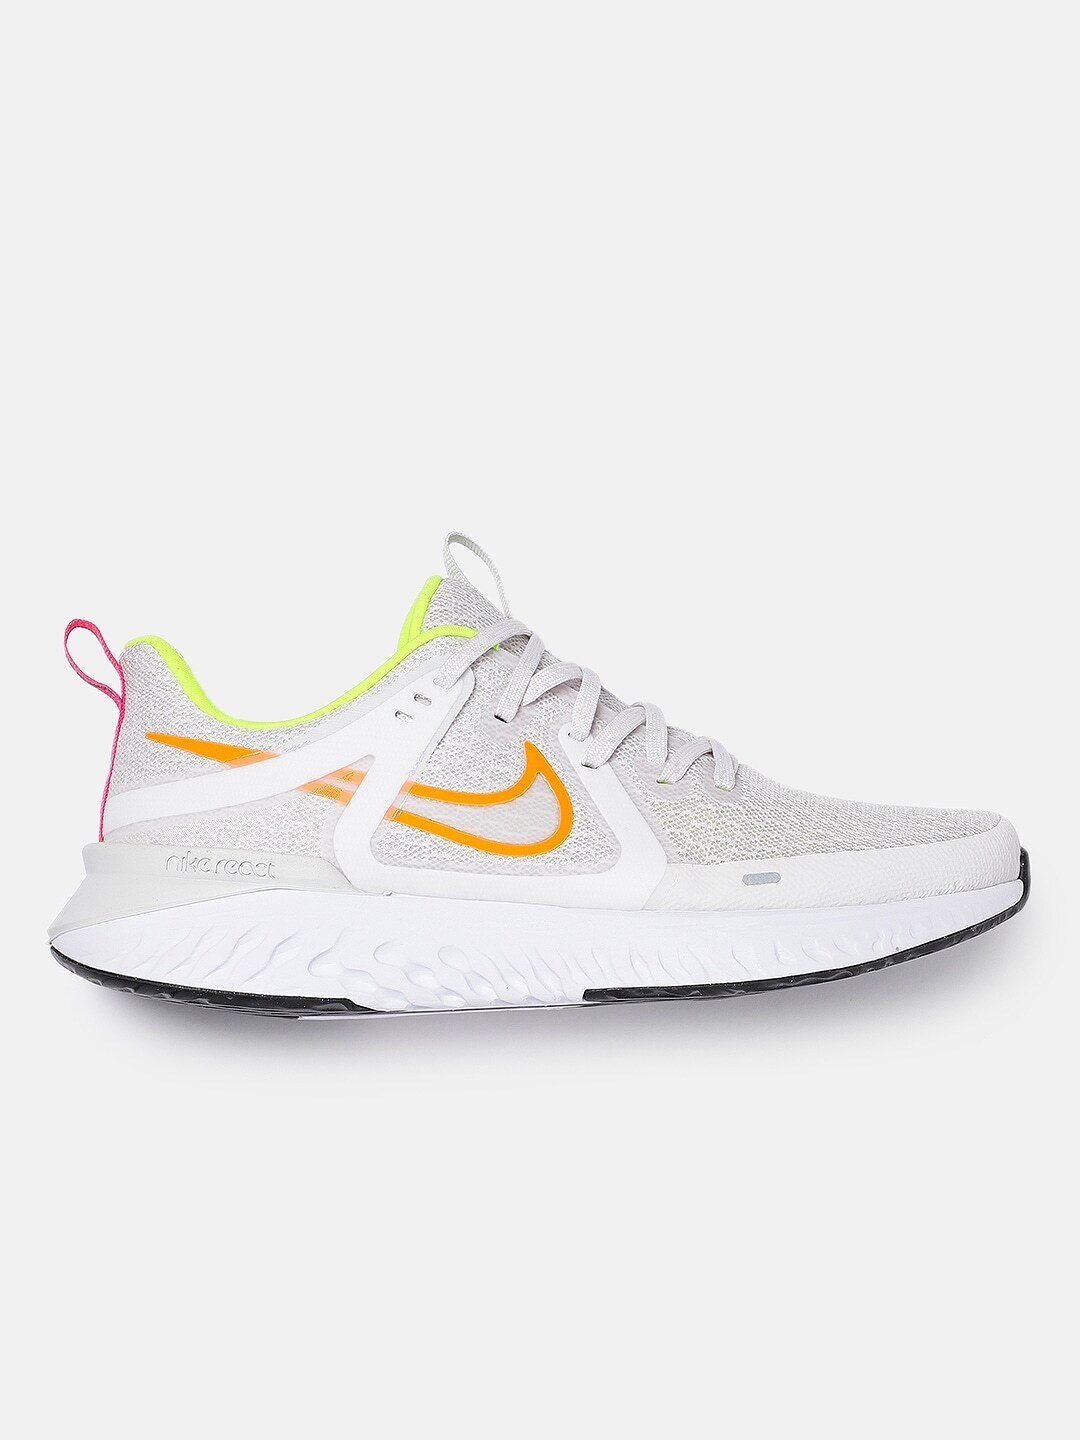 Men Off-White LEGEND REACT 2 Running Shoes-AT1368-008 - Discount Store